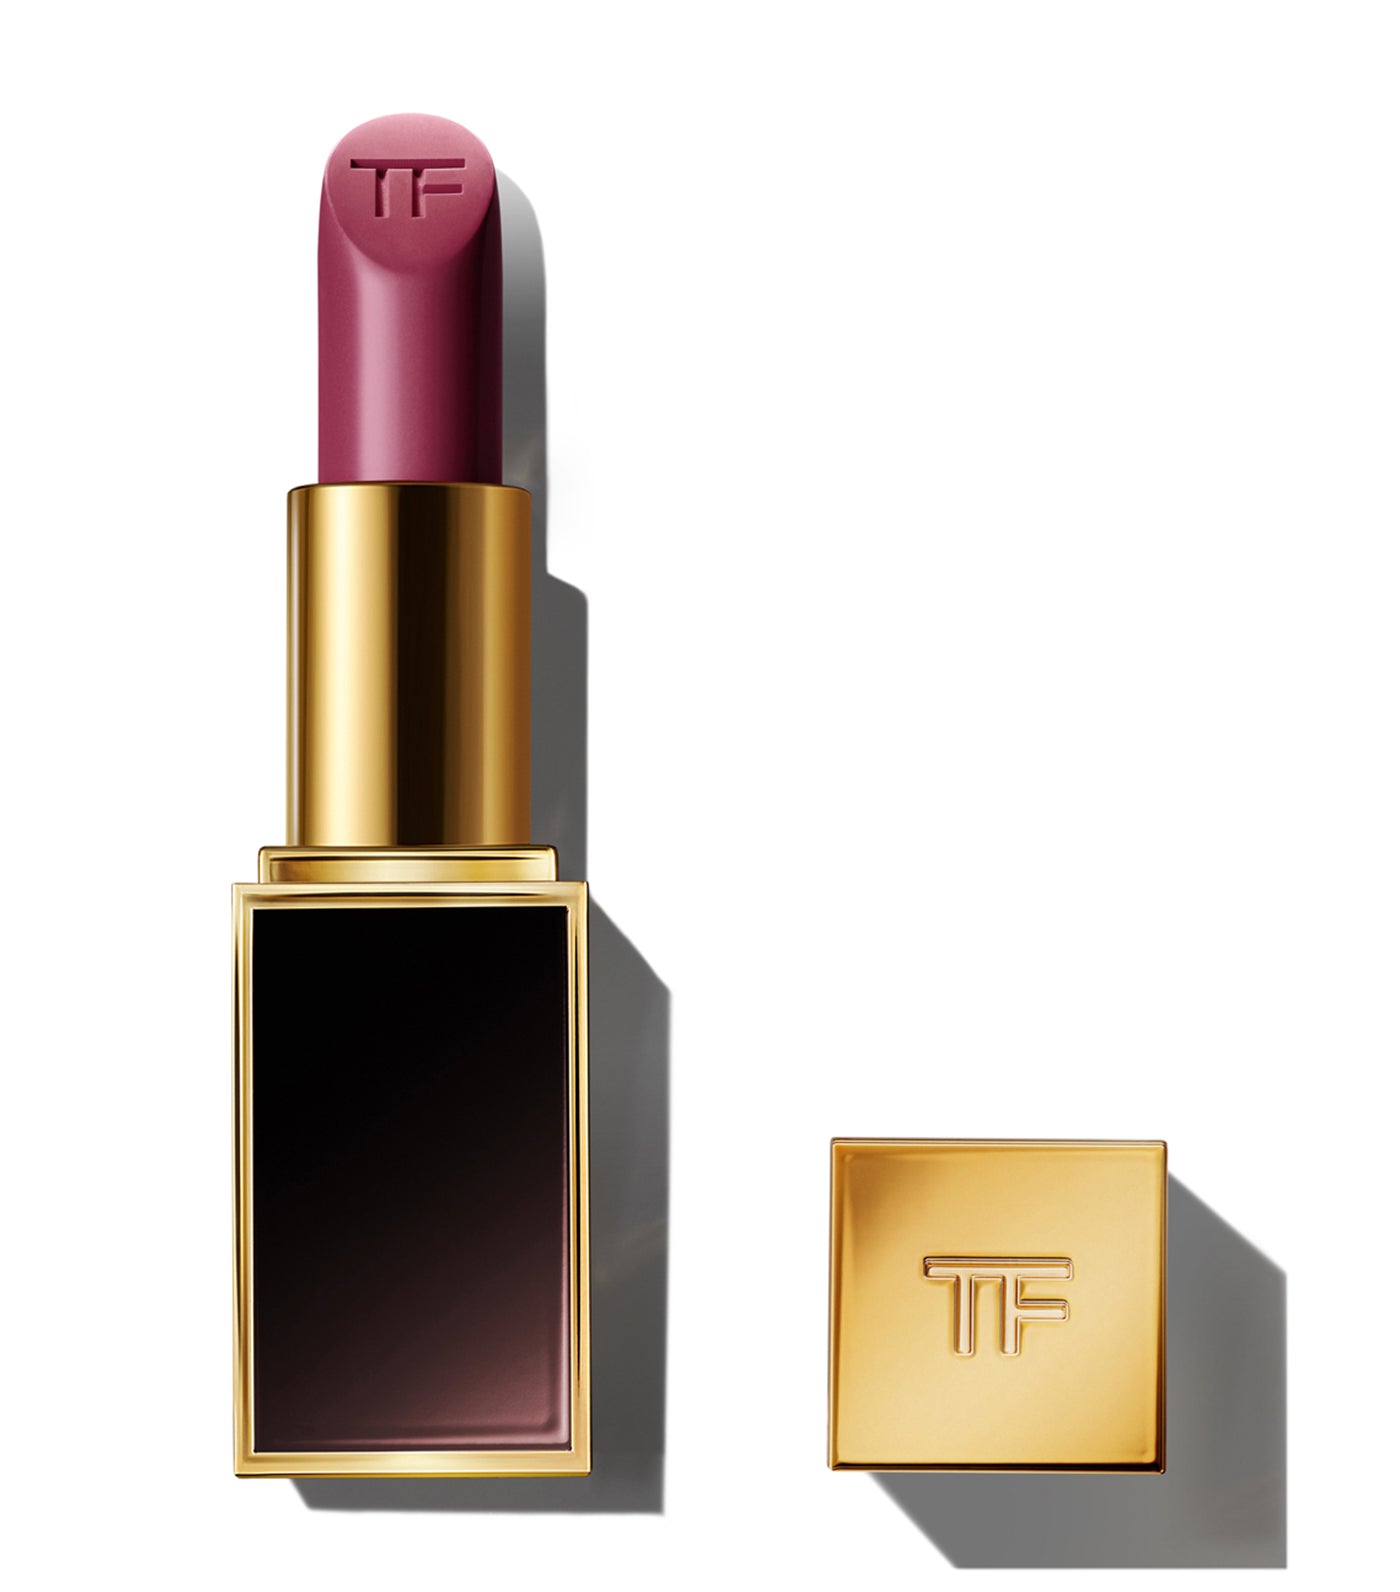 TOM FORD Complimentary Full-Sized Dangerous Beauty Lip Color